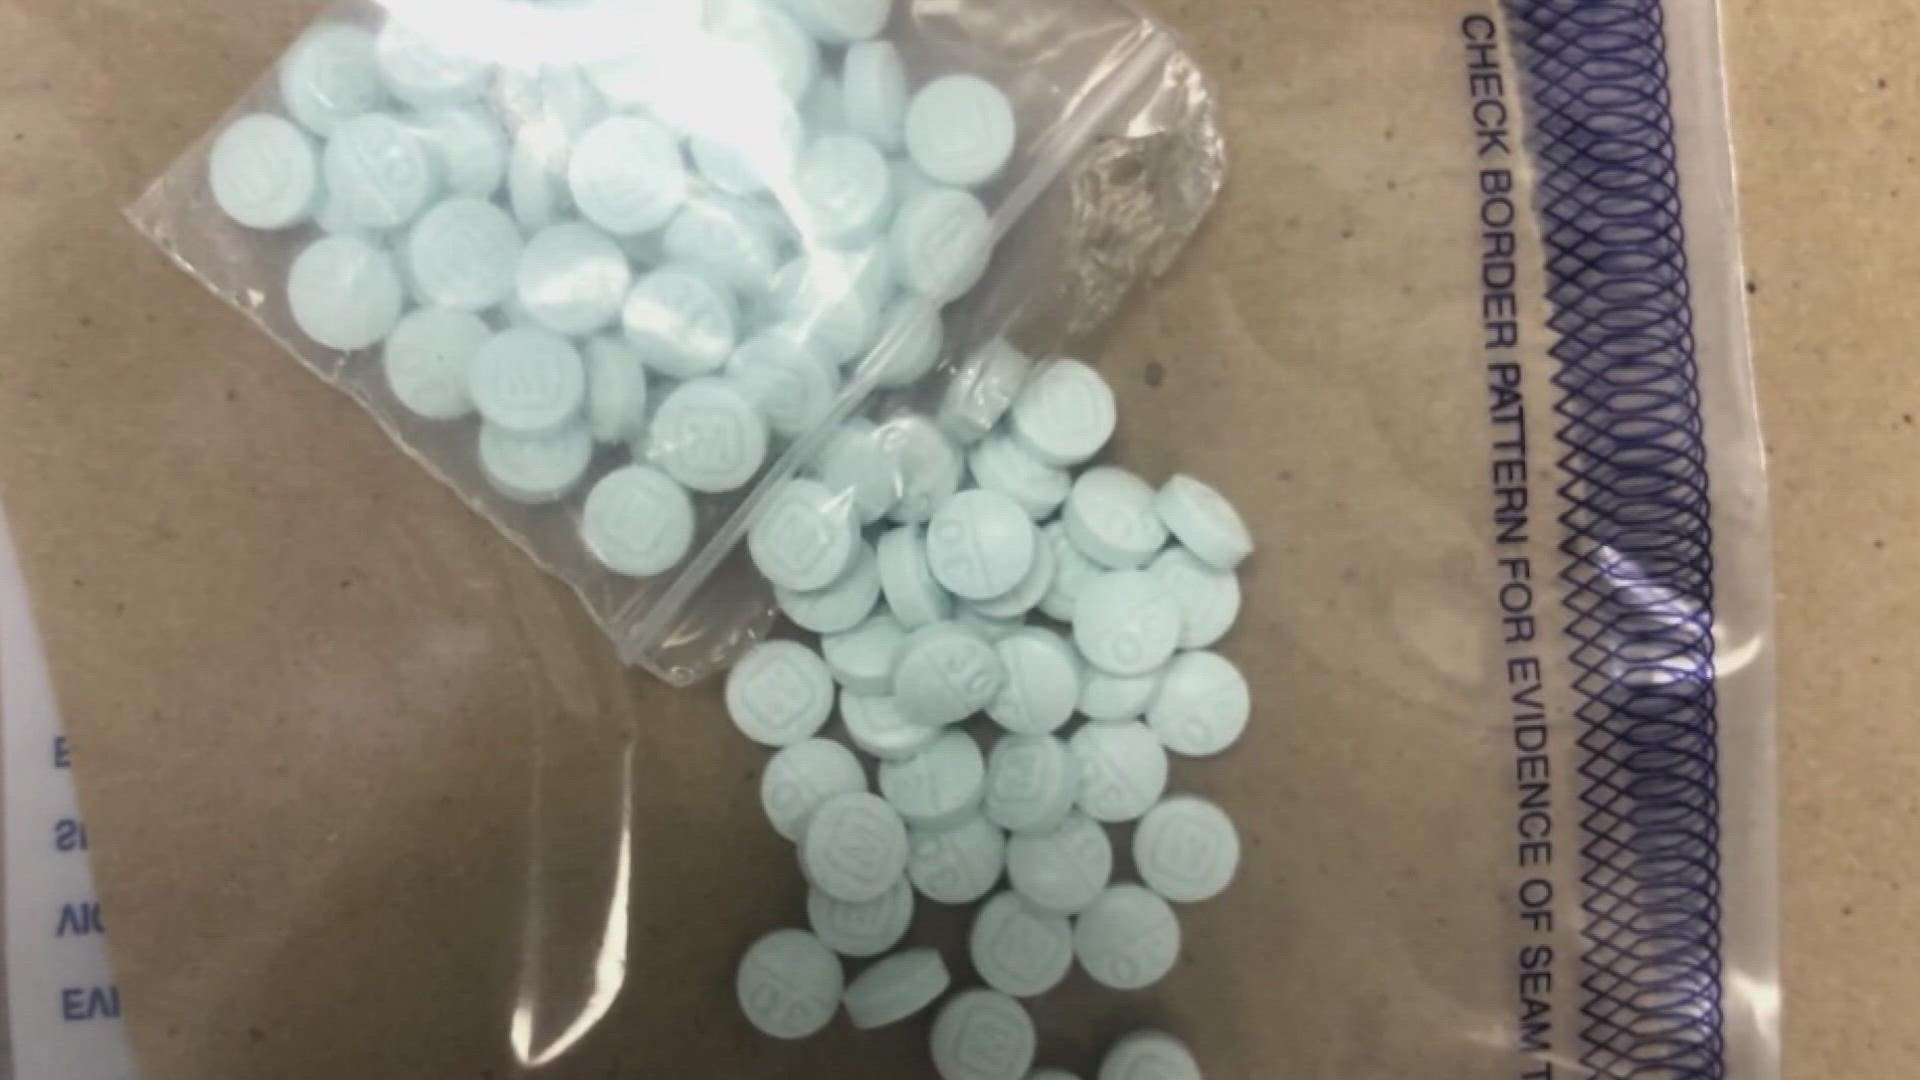 Graduates of drug diversion court in King County react to the rising use of fentanyl.